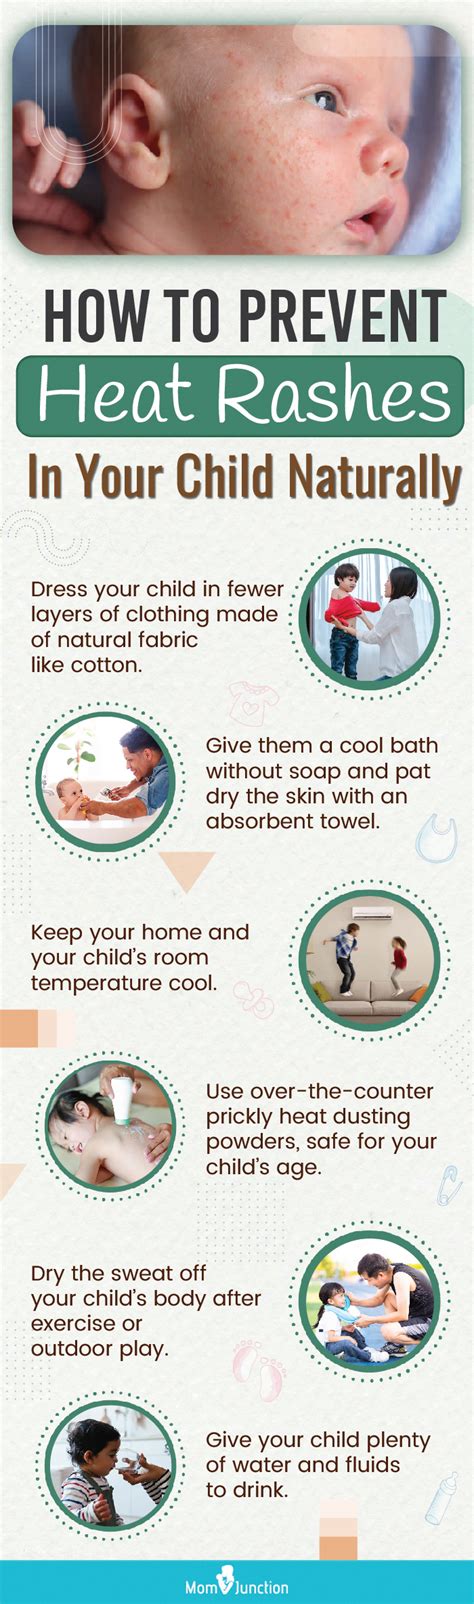 Heat Rashes In Children How To Treat And Prevent Them